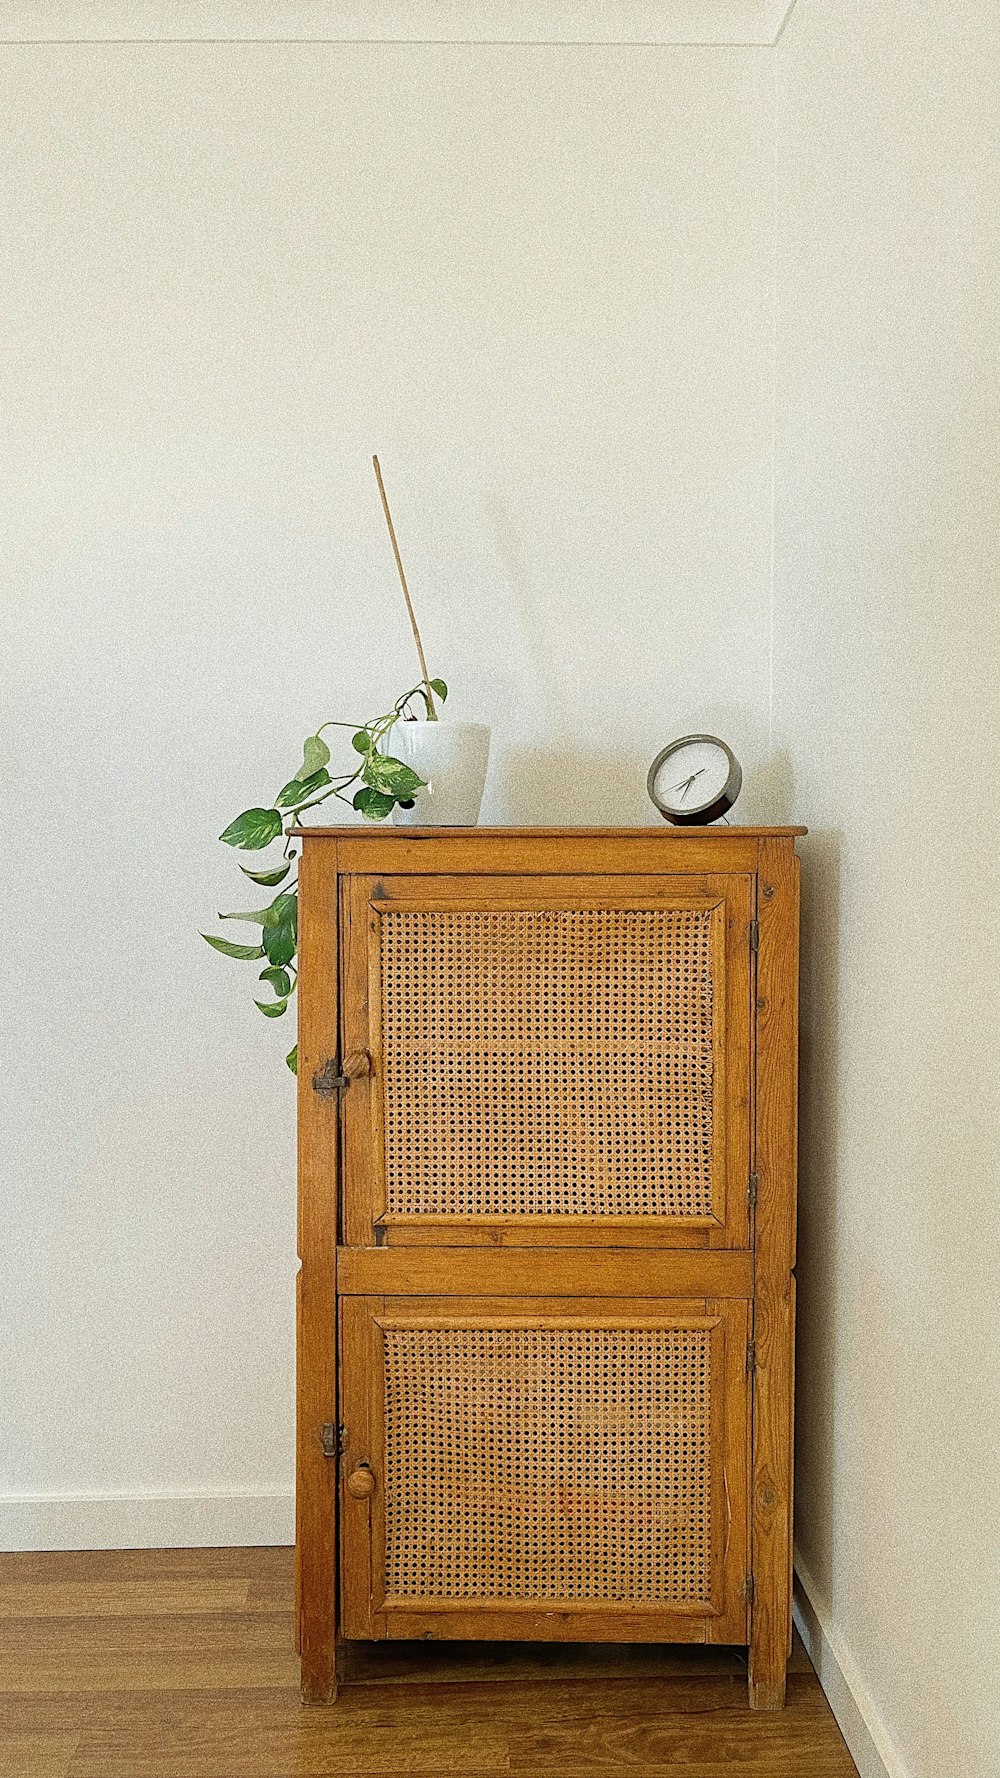 a wooden cabinet with a plant on top of it